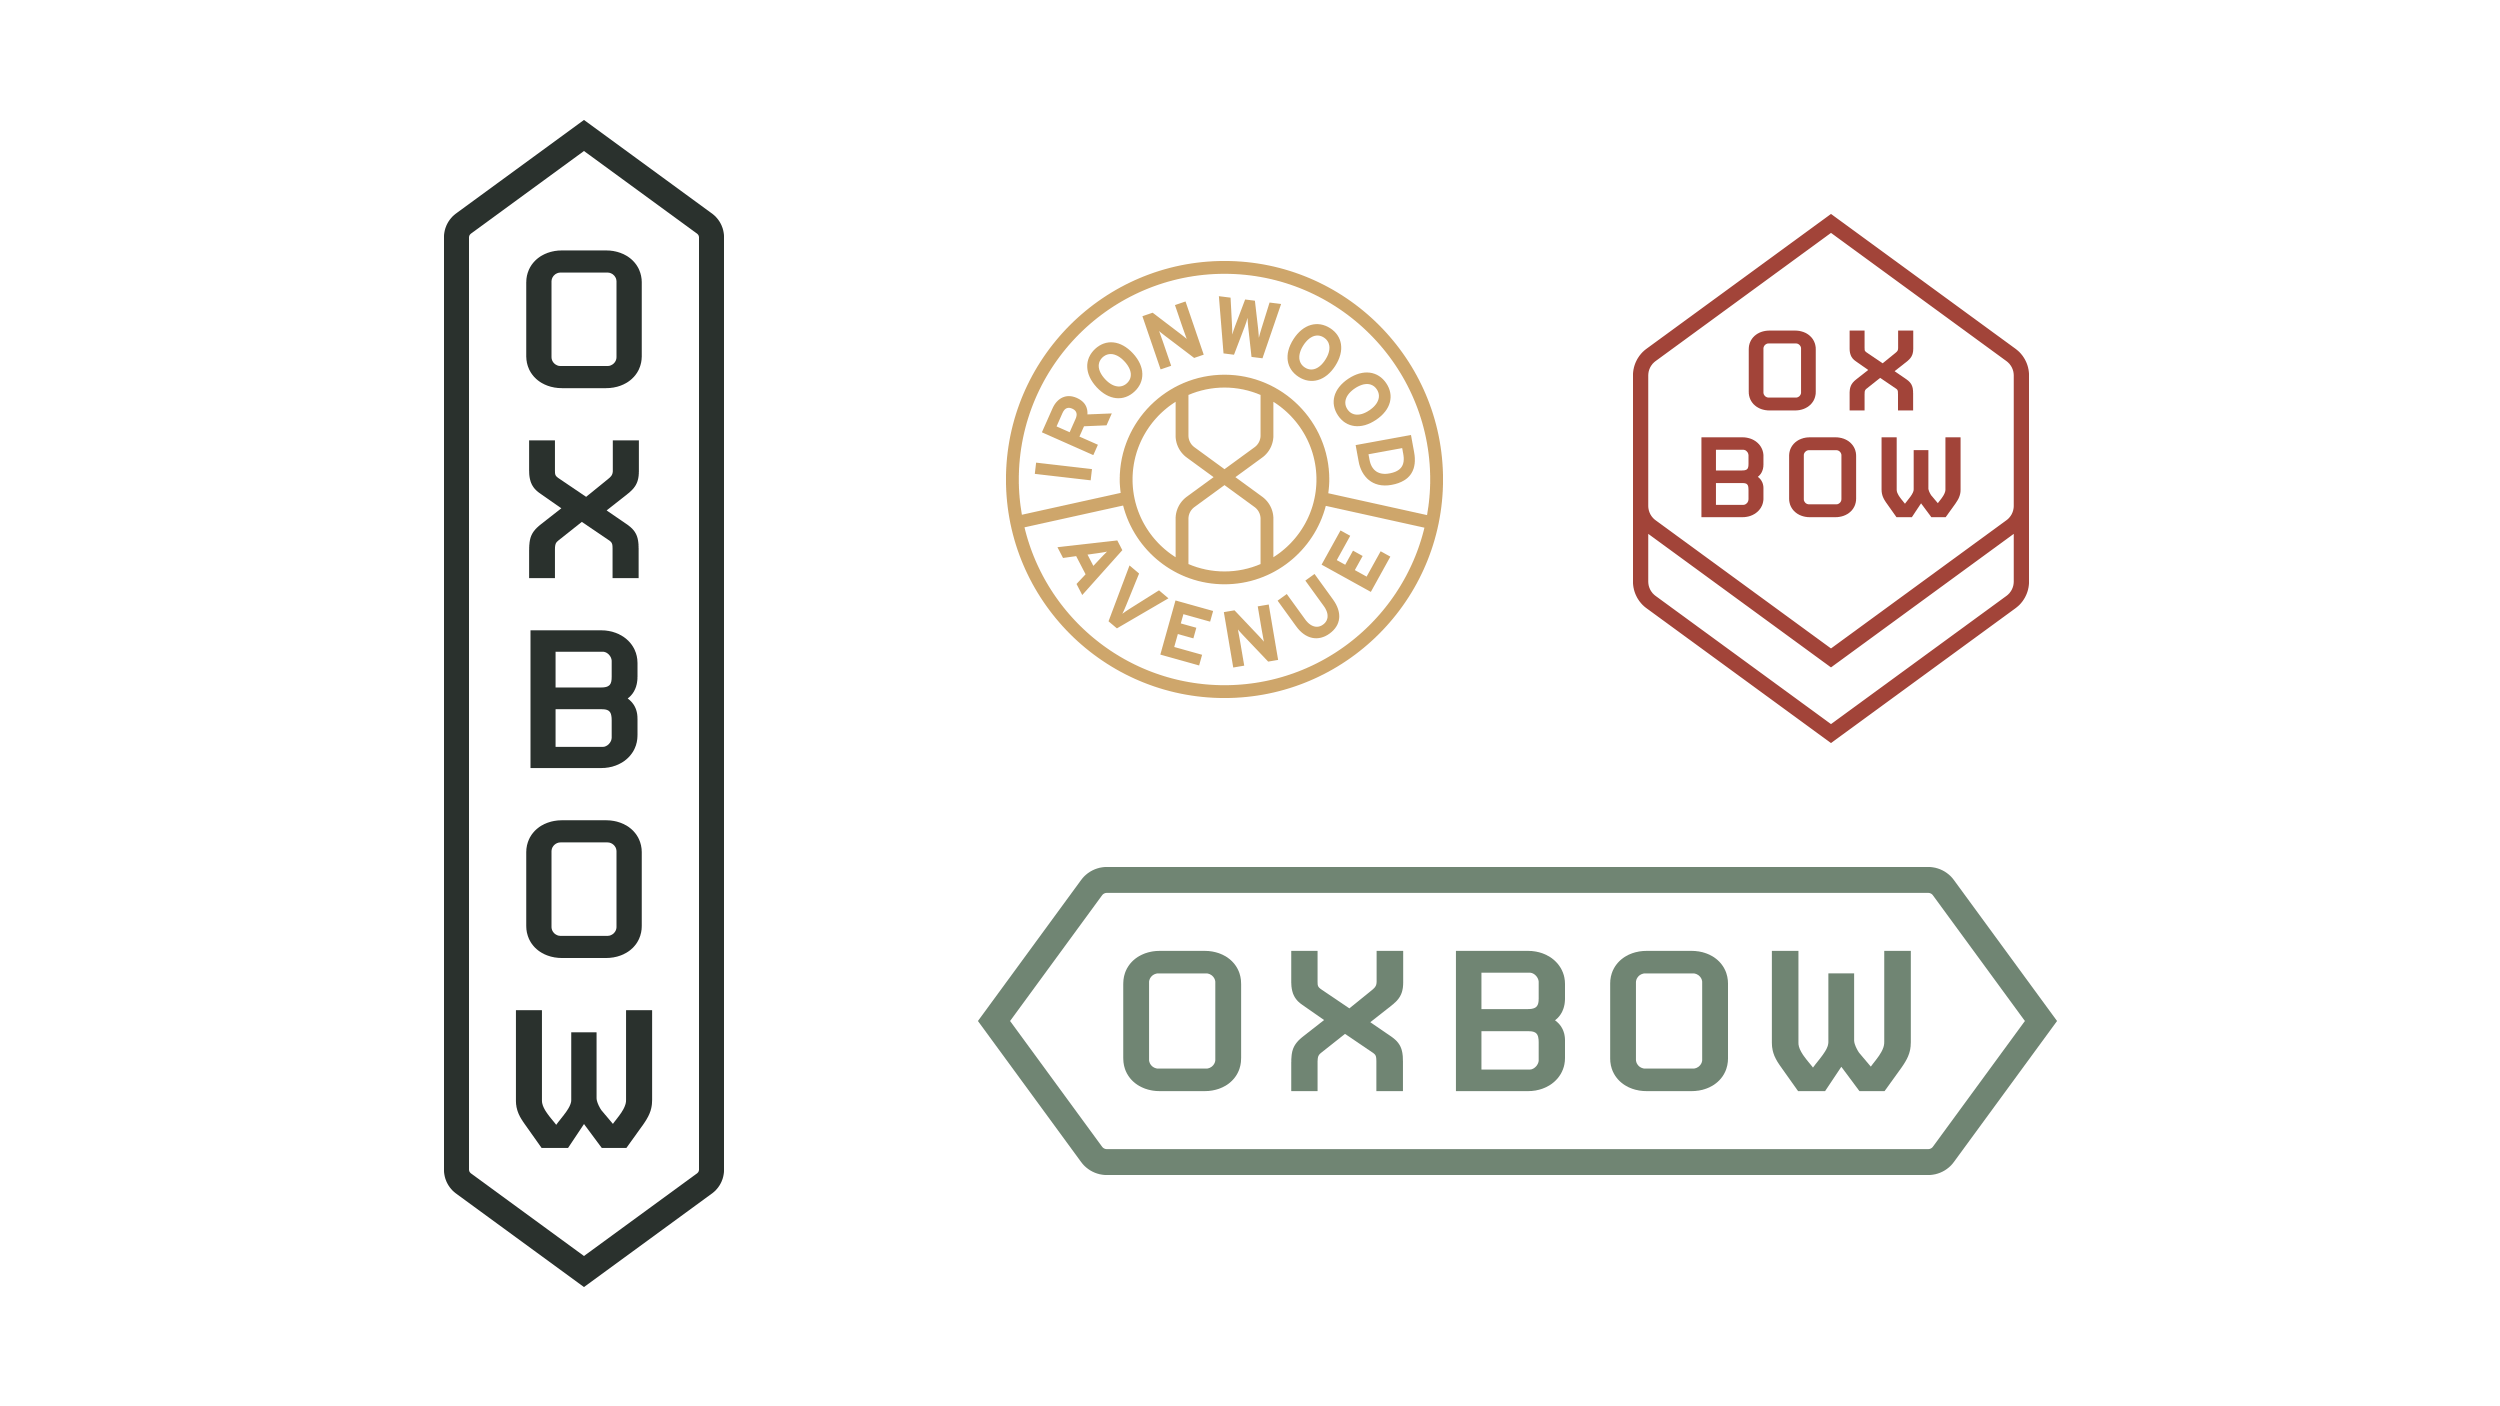 Oxbow logos featuring a vertical, horizontal, hexagon shape and Ironwood Avenue crest